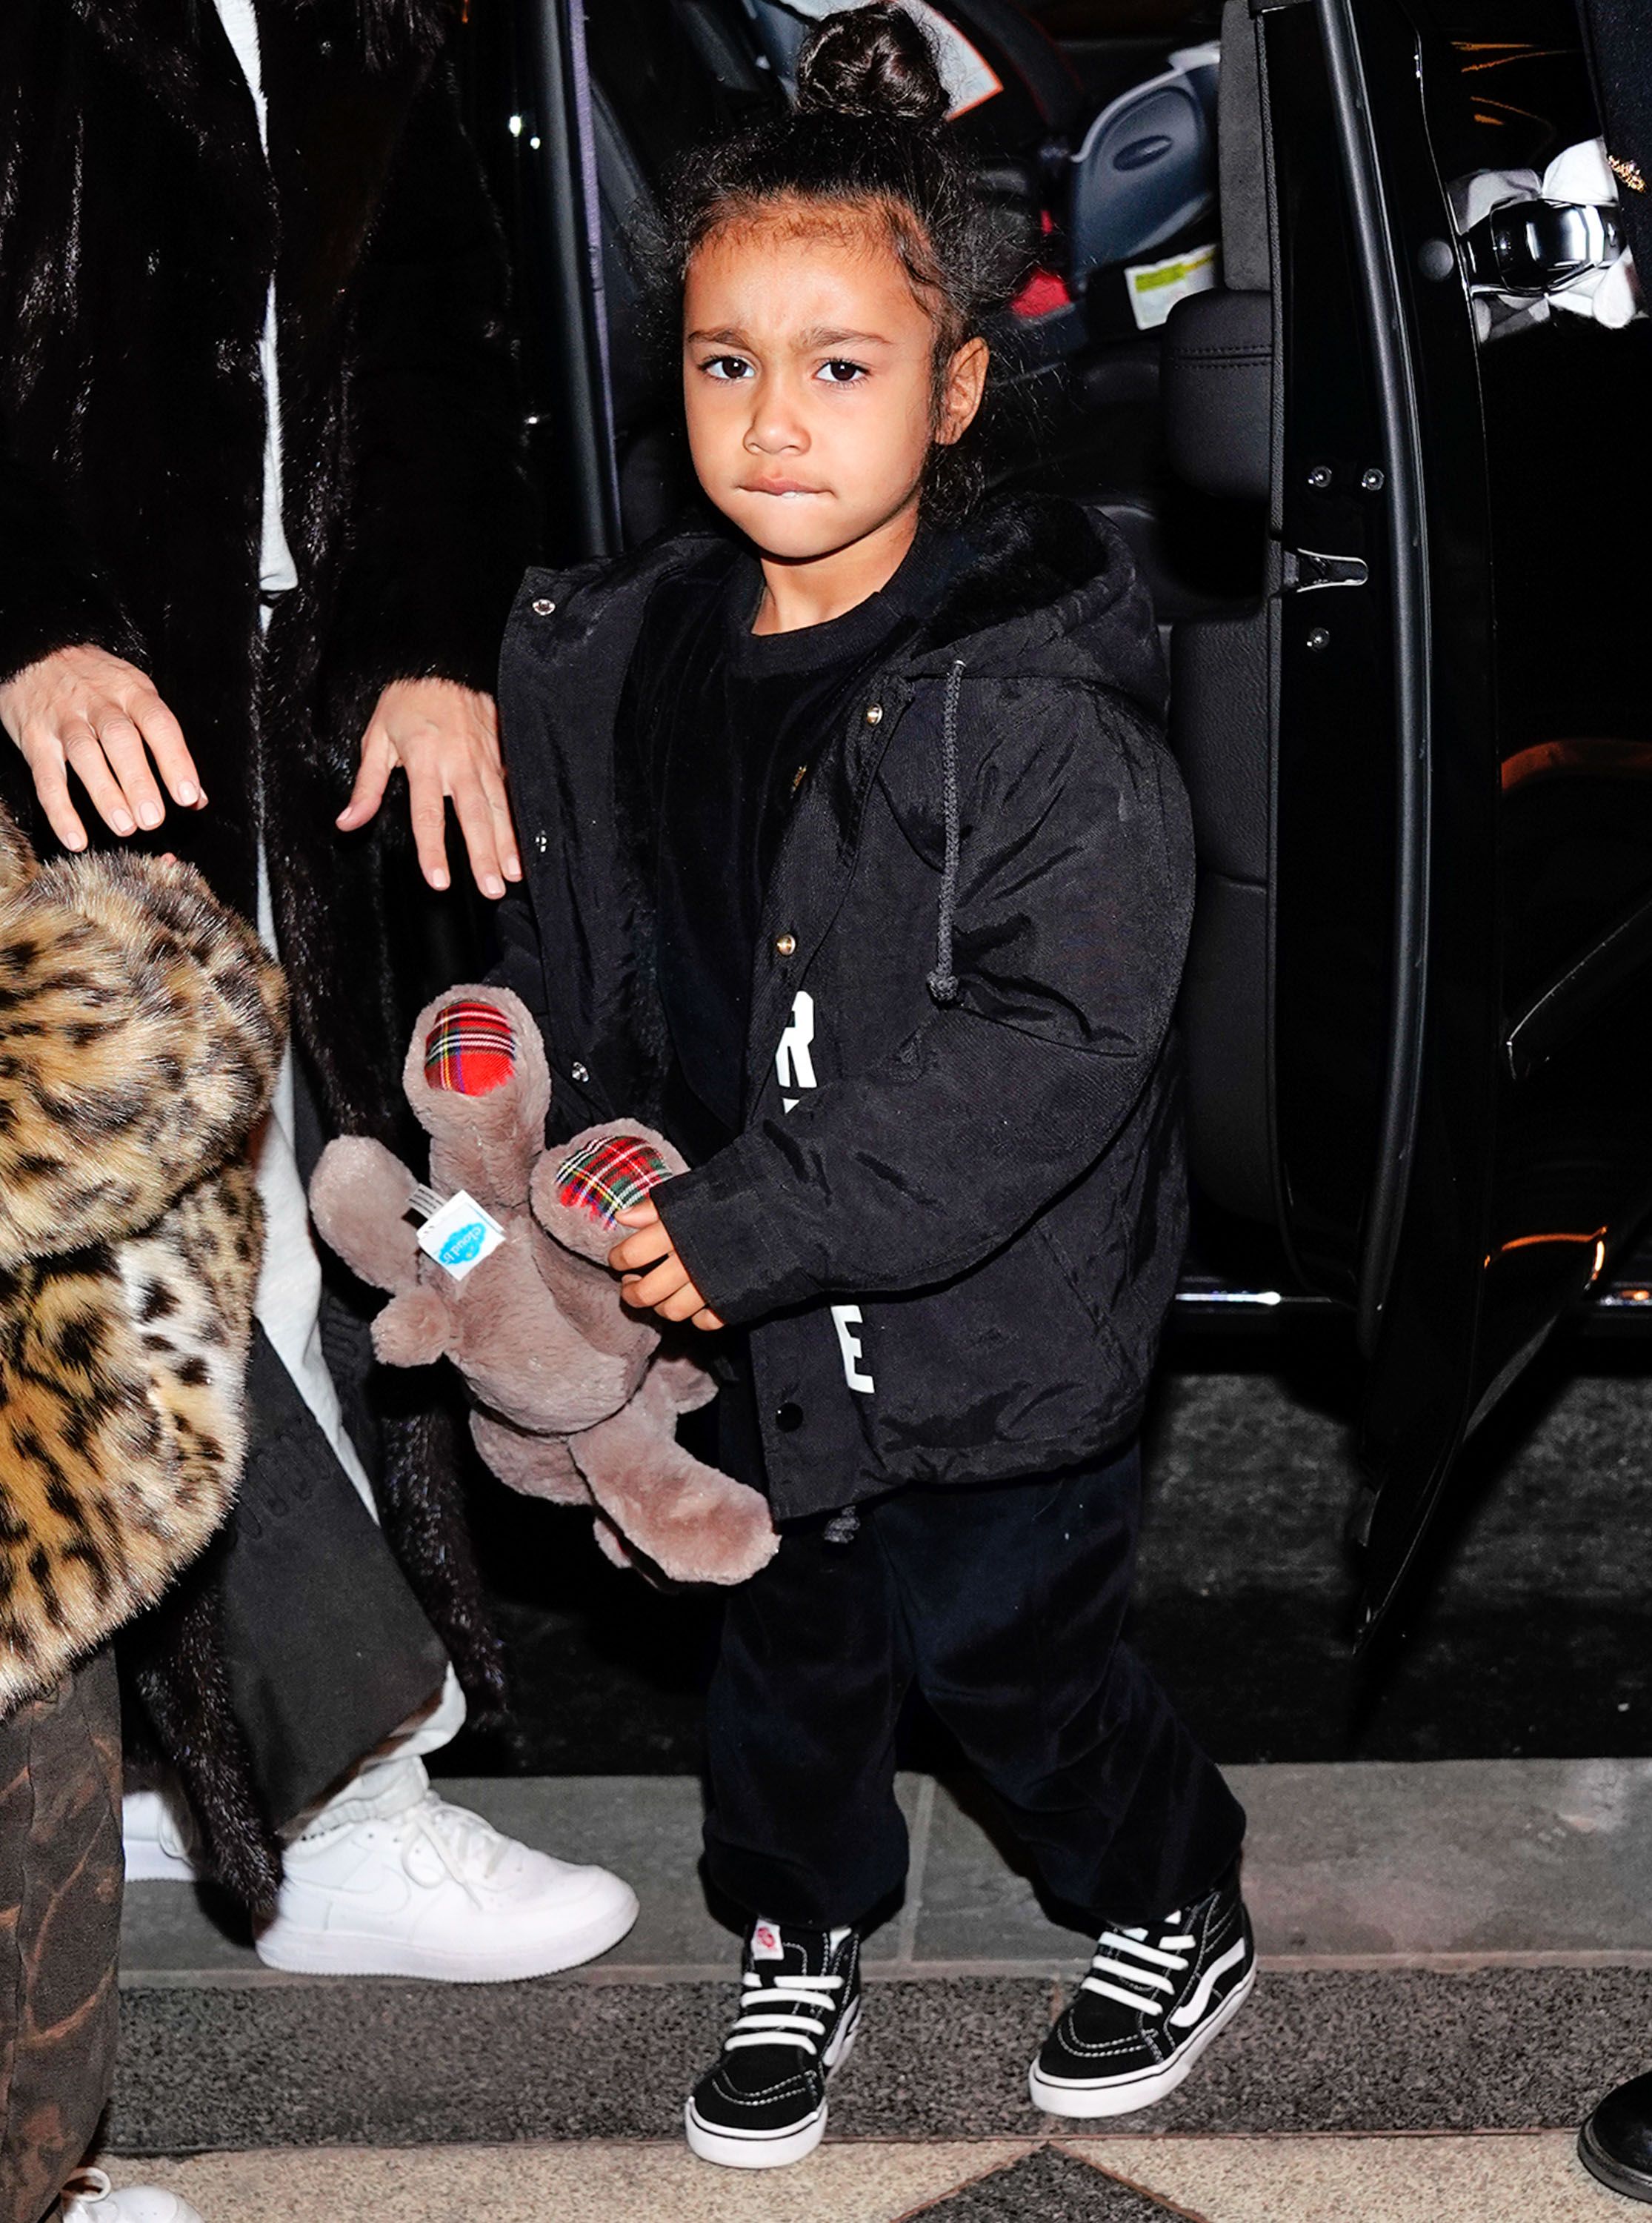 With this outfit, 9-year-old North West is just as stylish as her